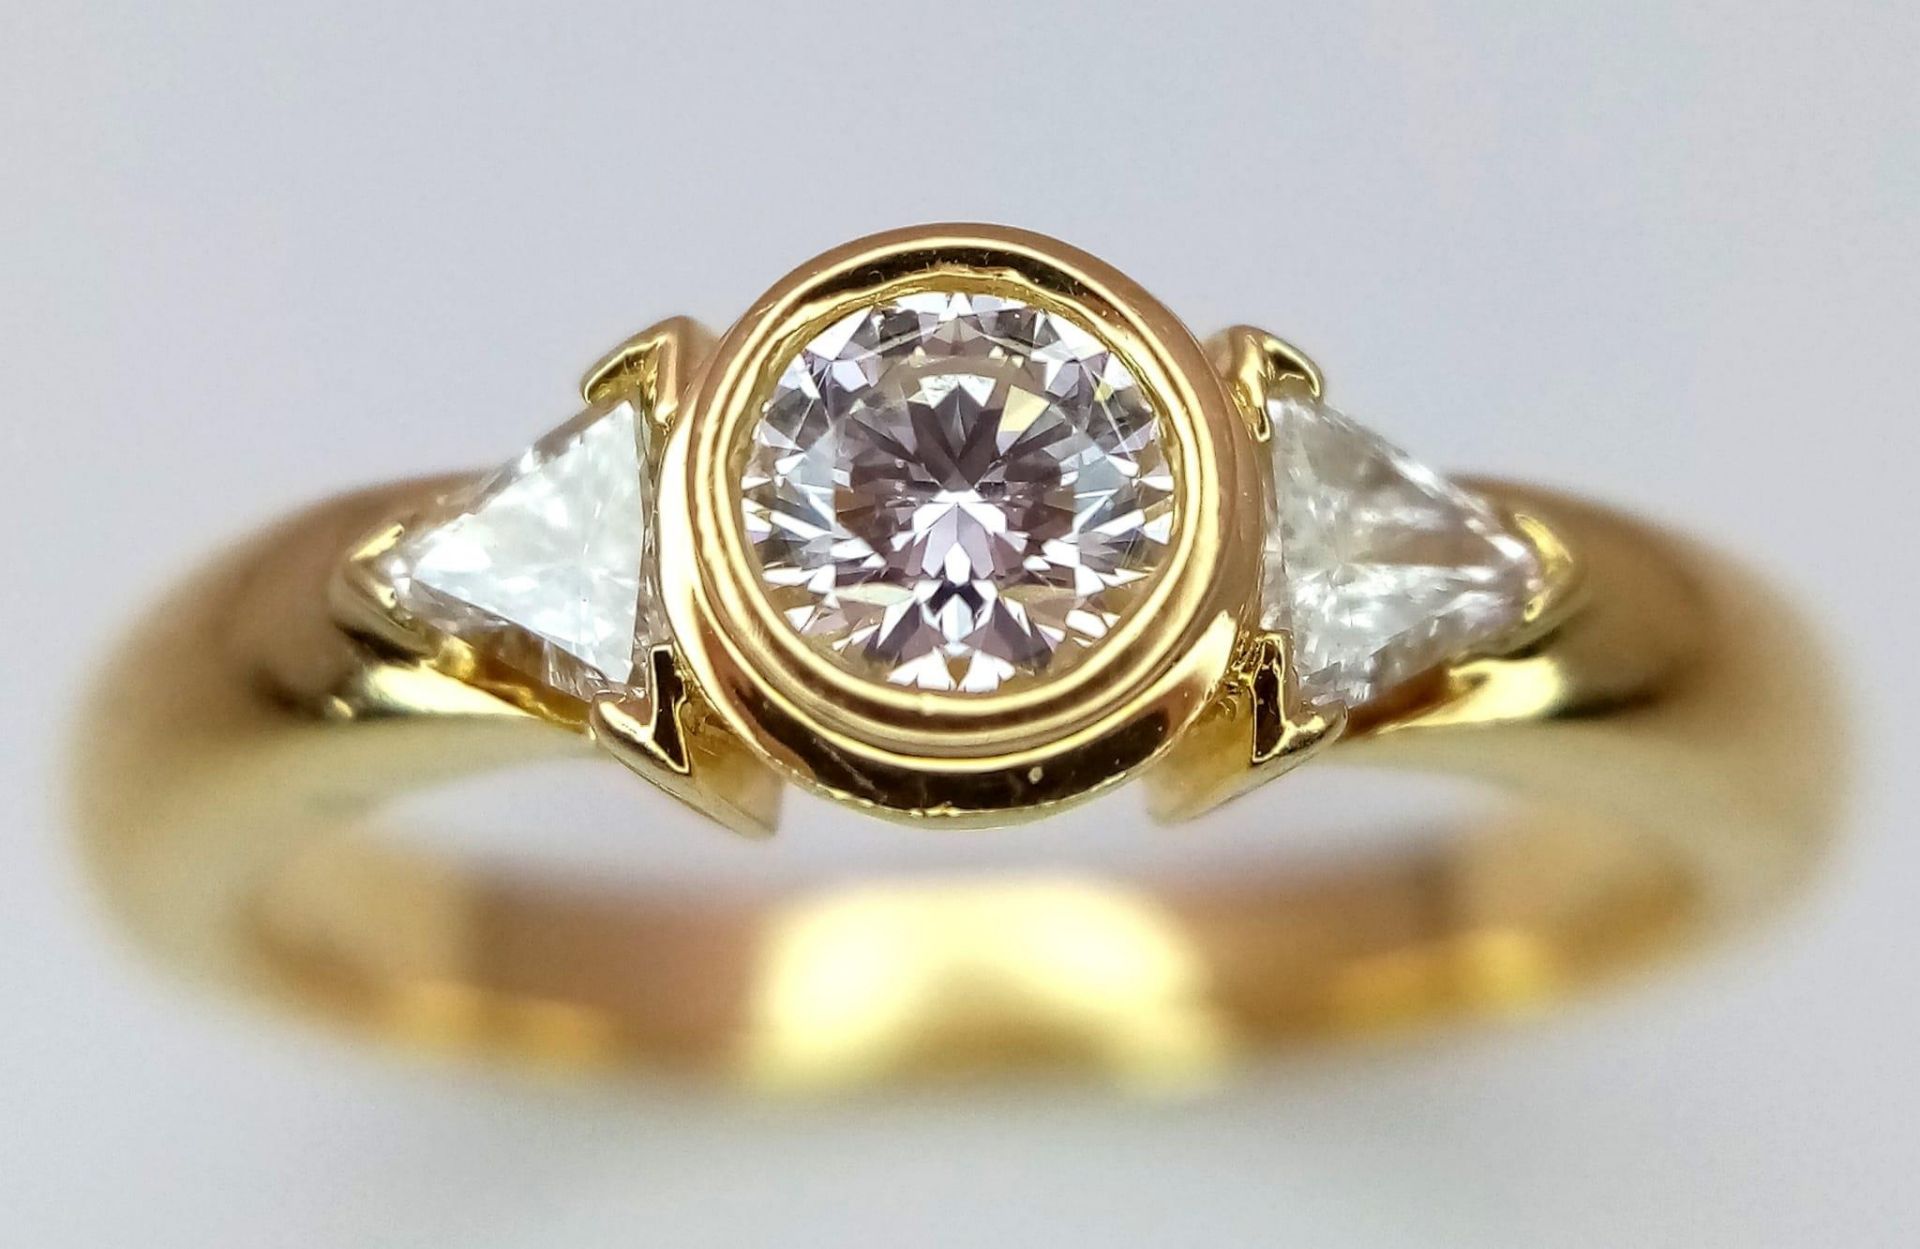 An 18K Yellow Gold Diamond Ring. Central round cut diamond with trillion cut diamond accents. Size